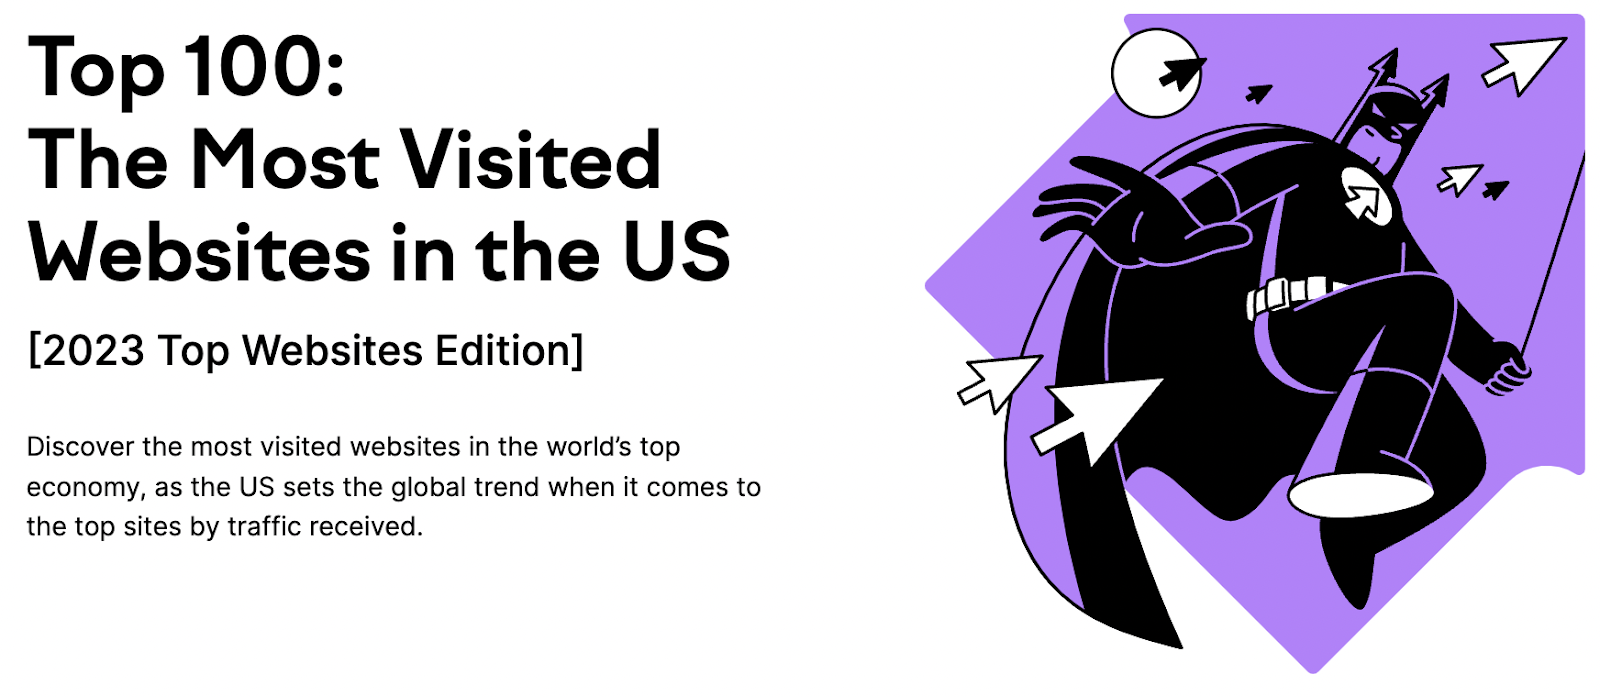 "Top 100: The Most Visited Websites in the US" headline